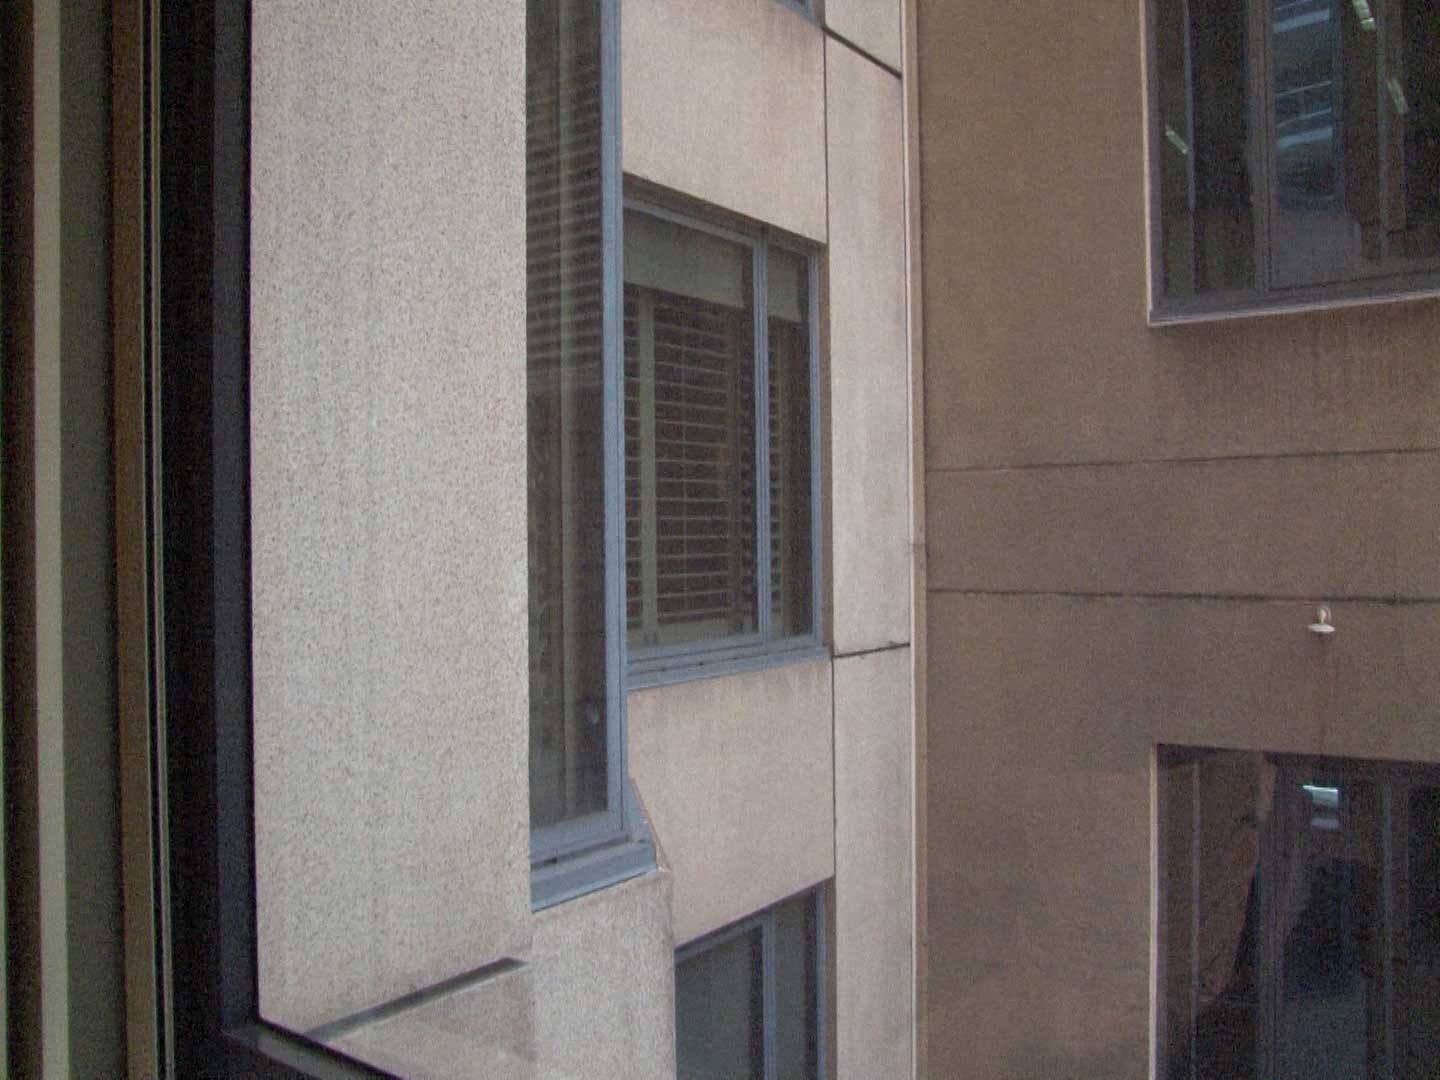 A film still, looking out of a window into a shady concrete courtyard. Other windows also look into the courtyard, some with blinds drawn down over the windows. We cannot see into the windows.